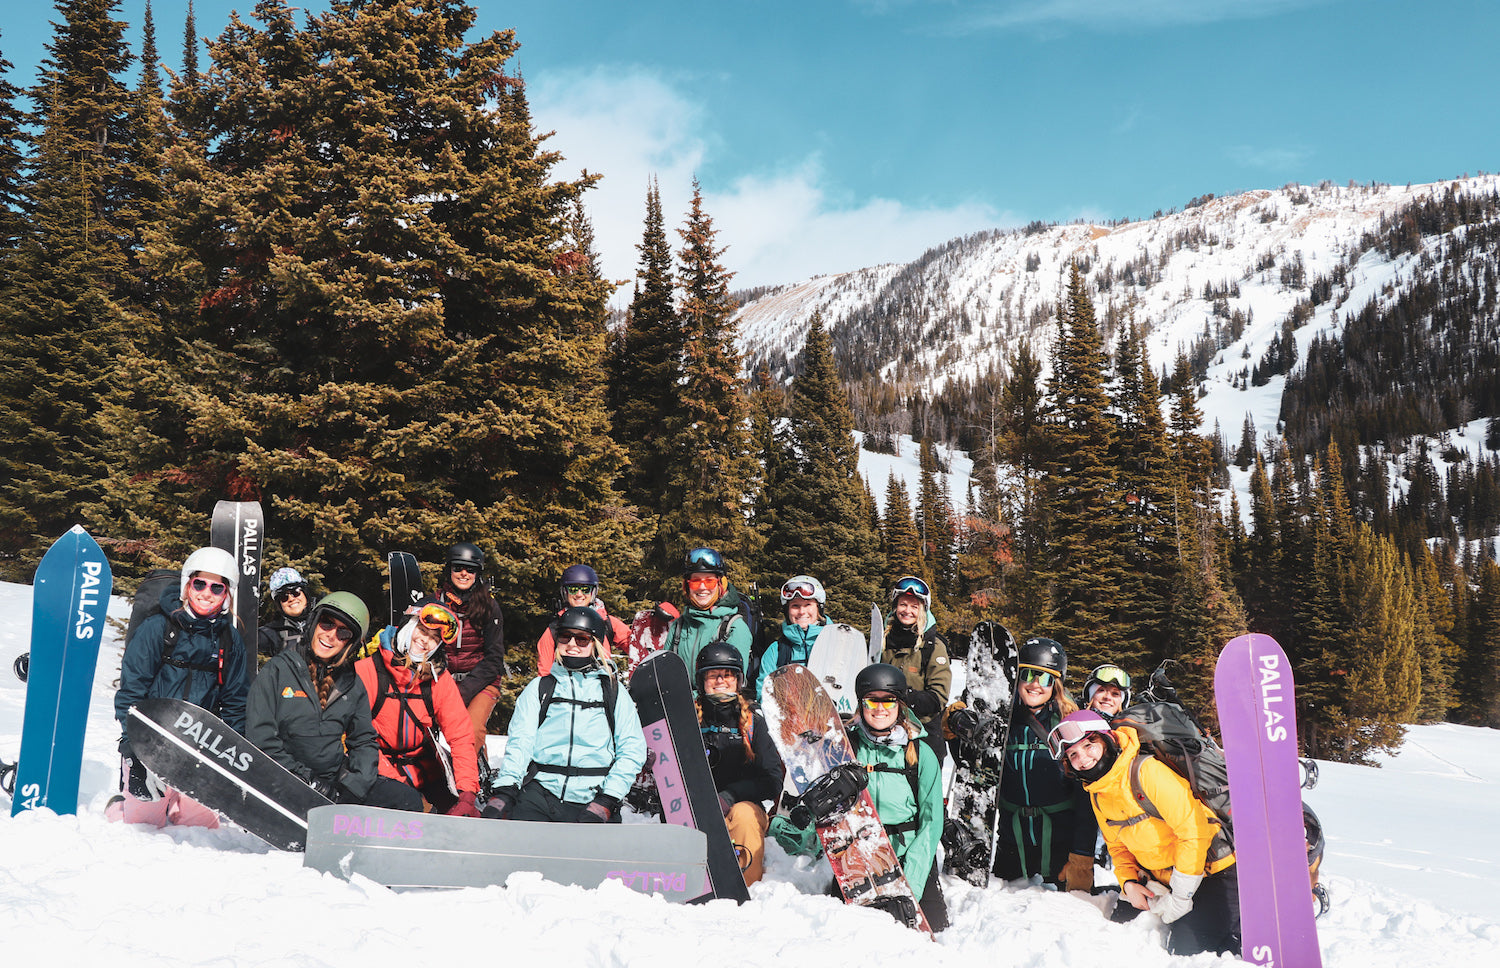 Image of 15 women sitting in the snow, smiling at the camera. It’s a bright day, with blue sky and many women wearing sunglasses. They are on a women’s splitboard tour with many of them demoing Pallas splitboards.